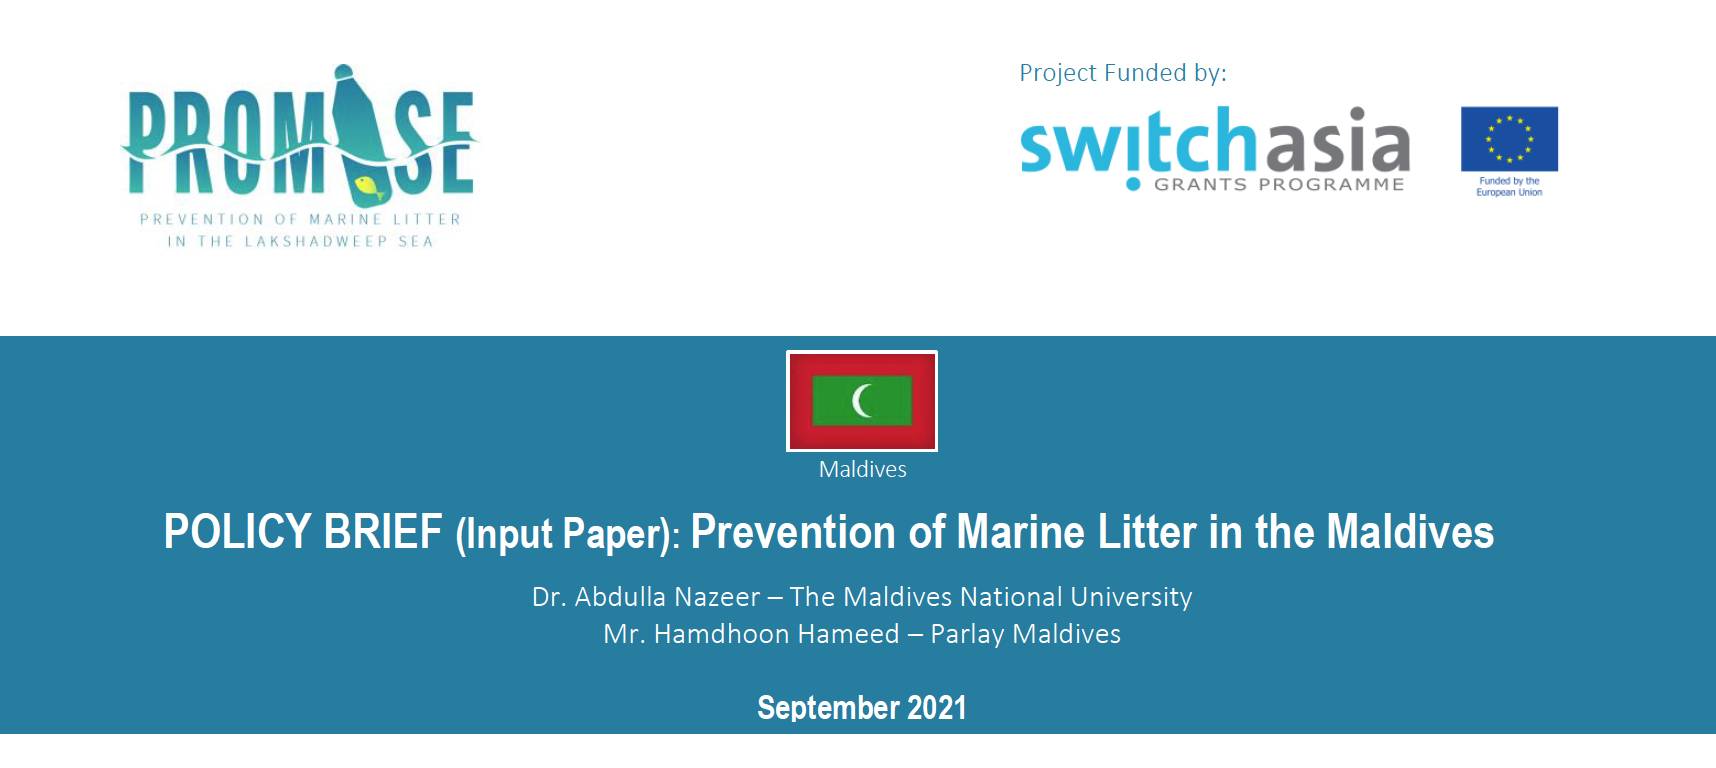 Prevention of Marine Litter in the Maldives